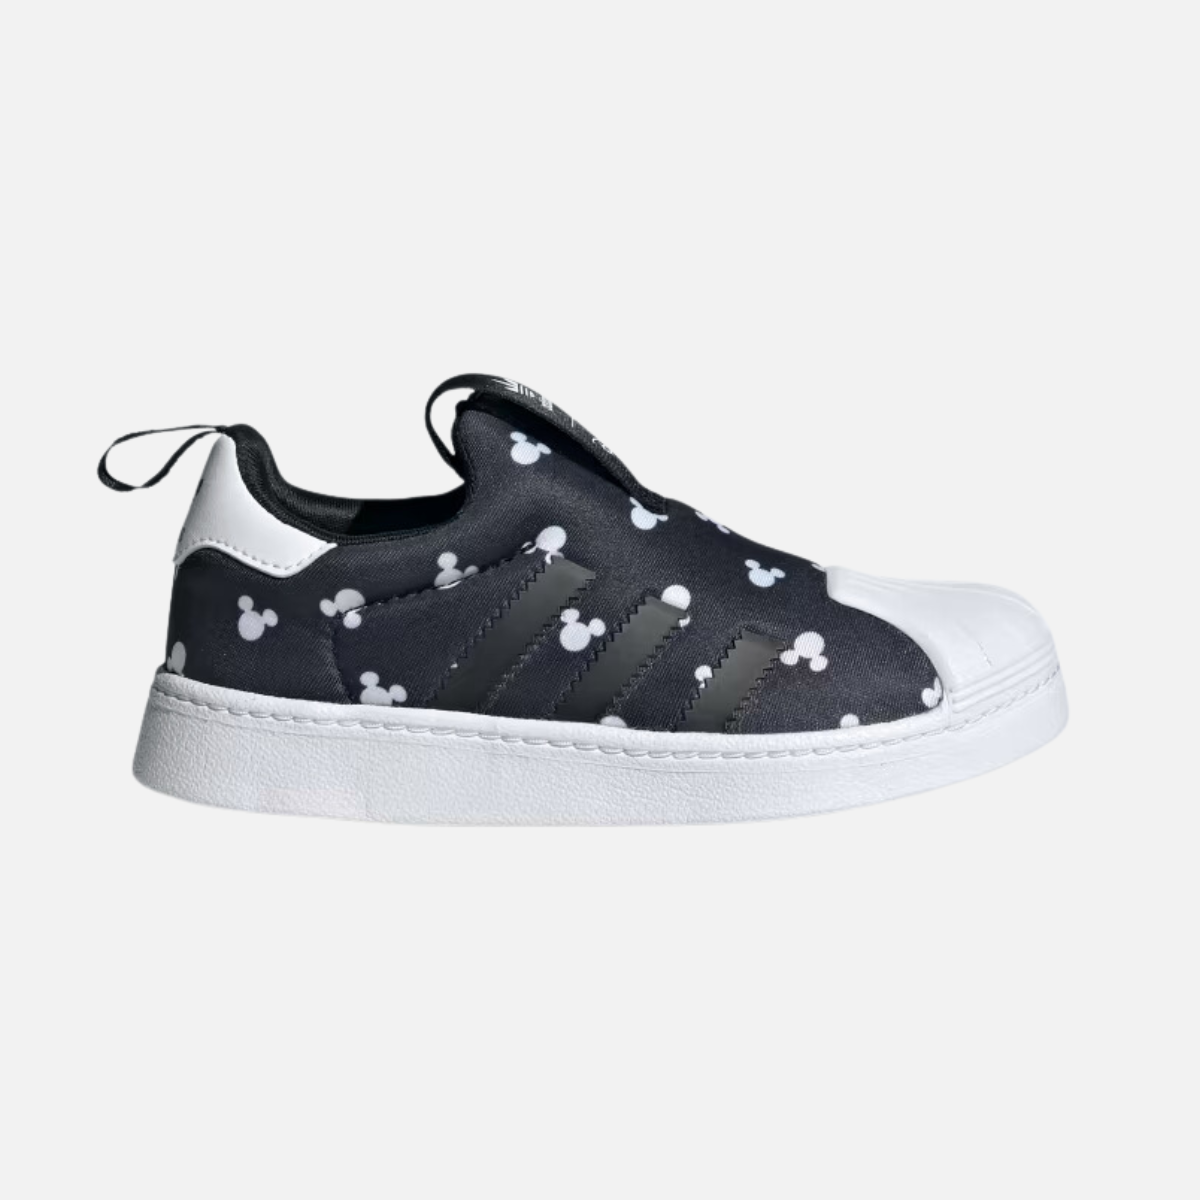 Adidas SUPERSTAR 360 Kids Unisex Shoes BOY AND GIRL (4-7 YEAR) -Core Black/Cloud White/Core Black